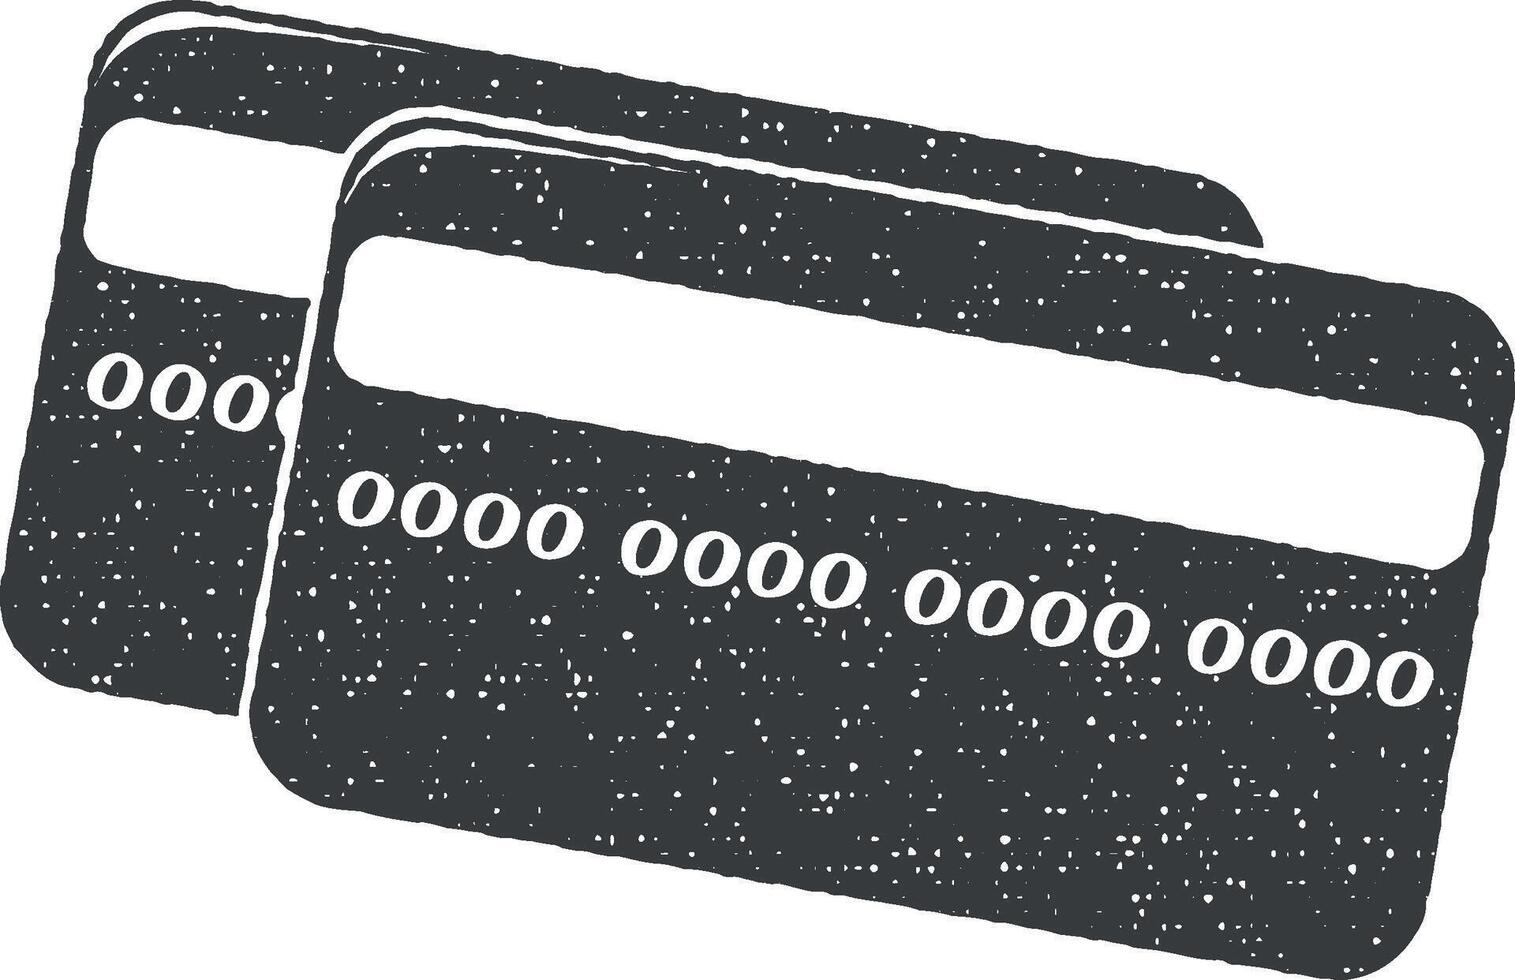 credit cards vector icon illustration with stamp effect